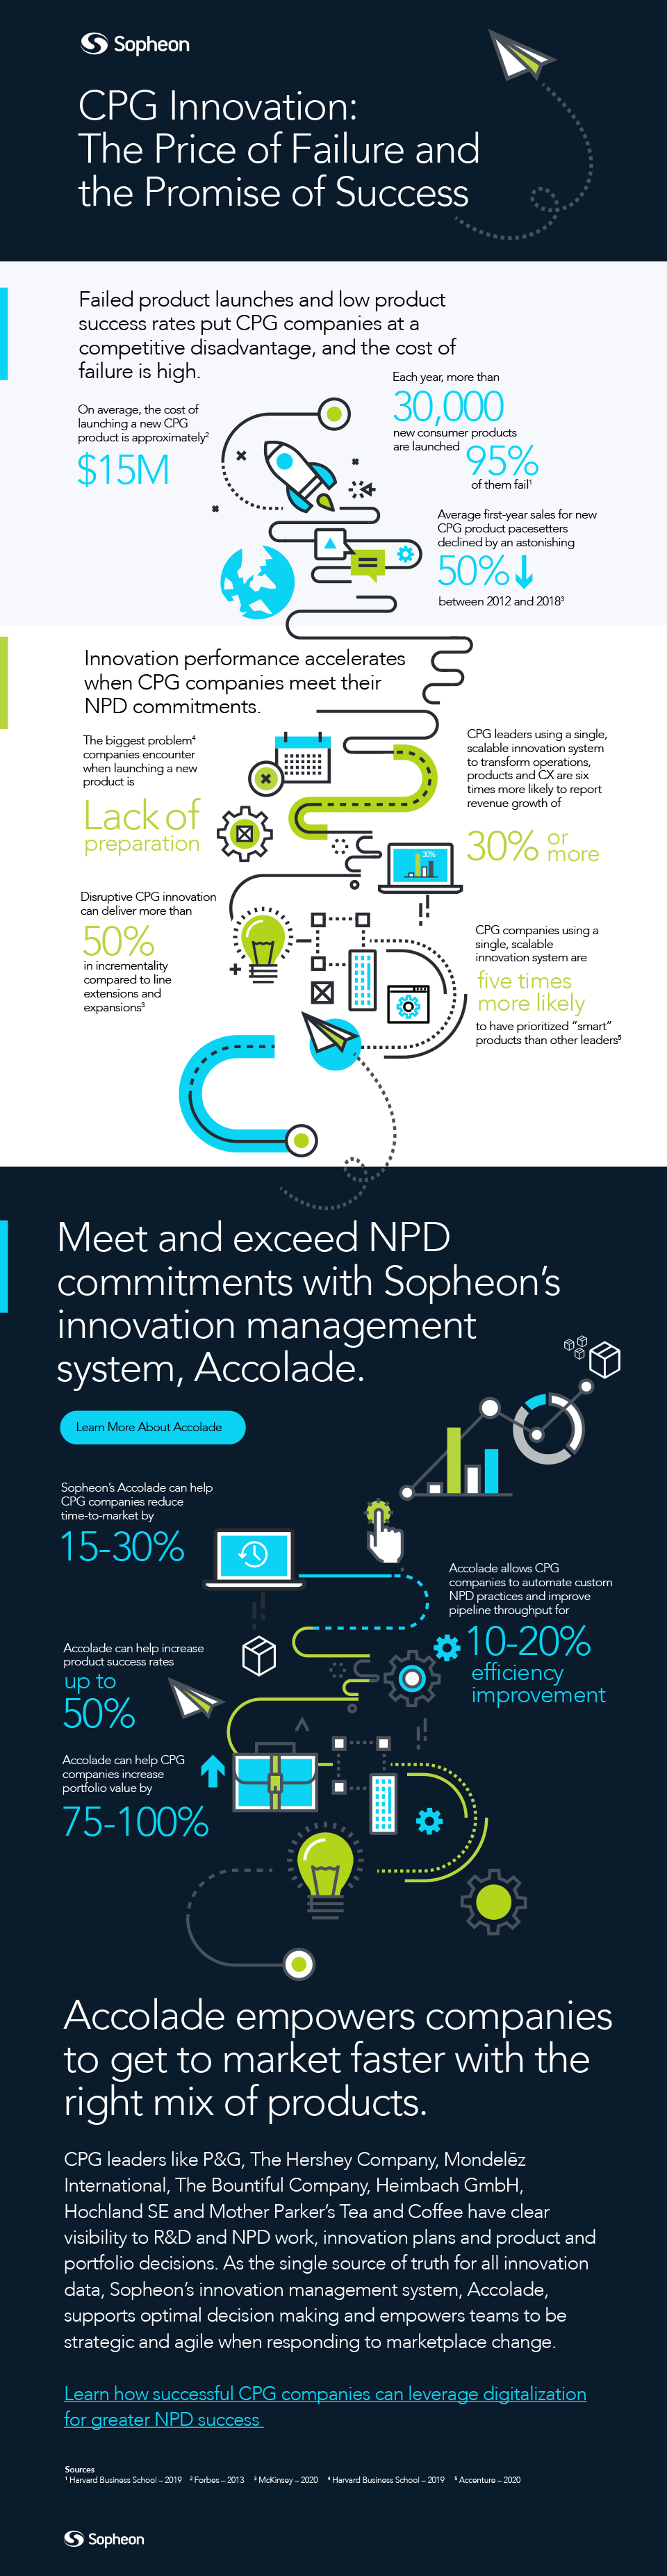 cpg-innovation-infographic